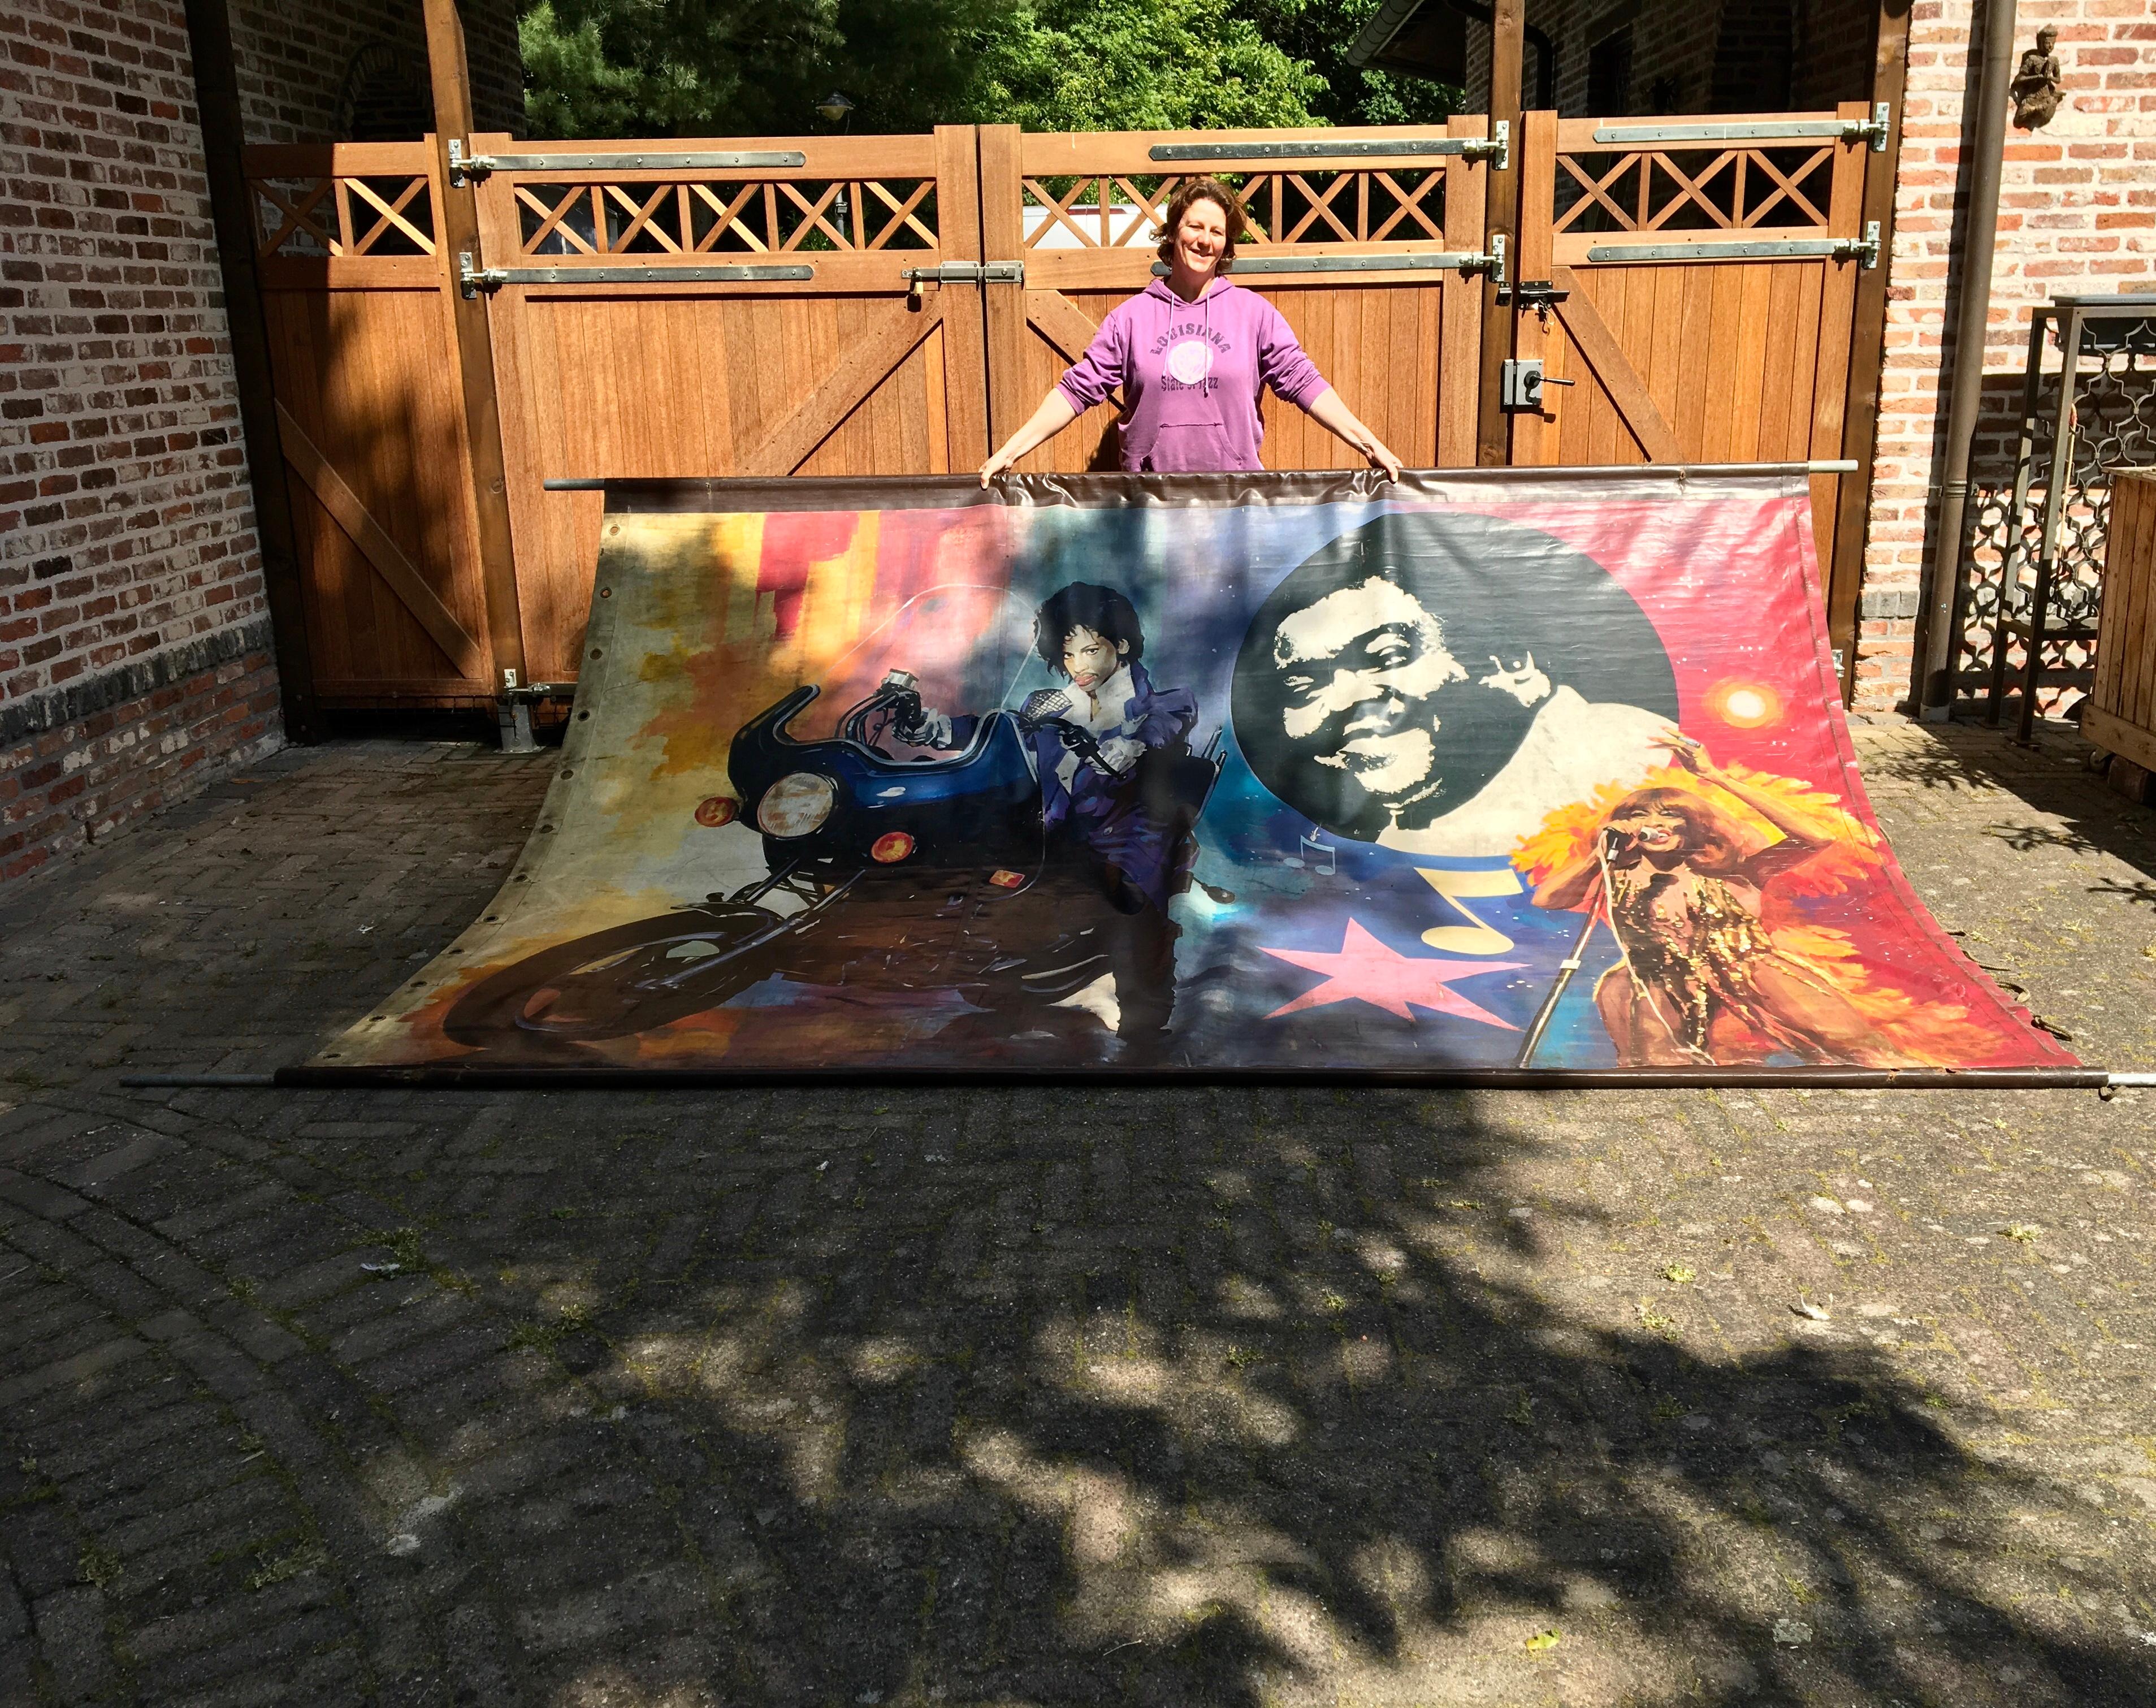 Tina Turner, Prince and Fats Domino Or Percy Sledge (?) , 
all together on a large carnival banner. 
A handpainted canvas banner used at the fairground at a bumper car - dodgem car attraction. All 3 of them iconic artists and legendary singers.